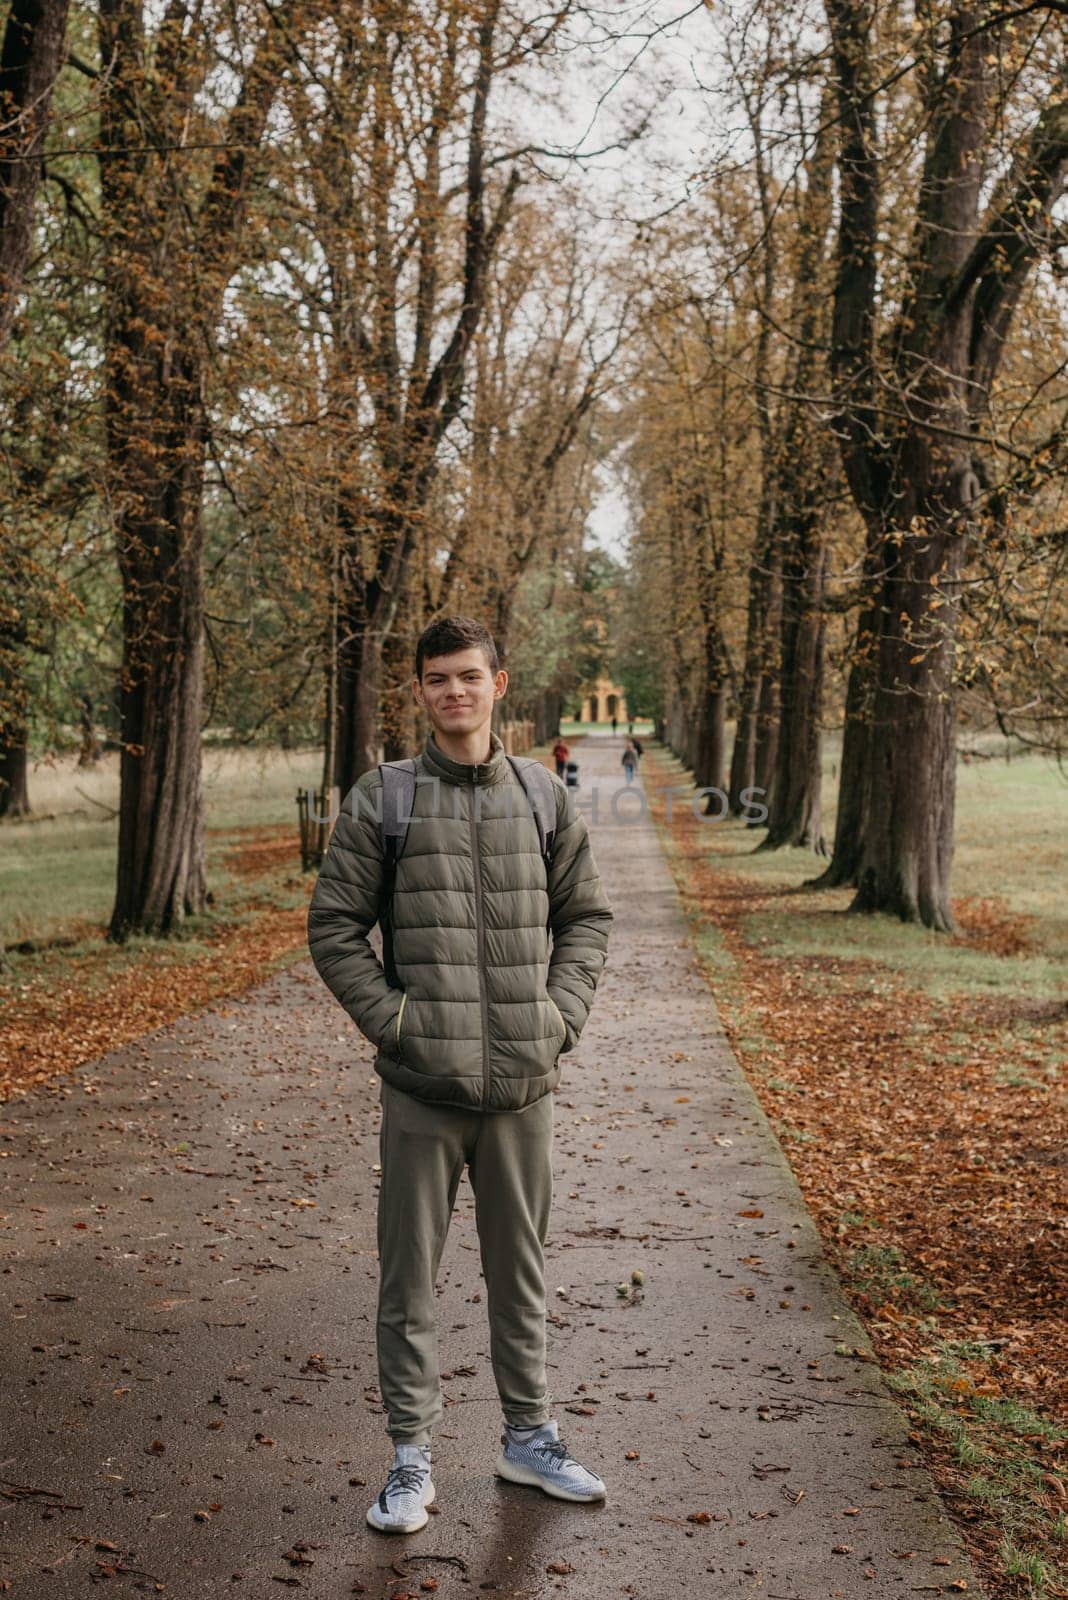 a guy in a jacket stands on an alley in the park during the fall season. Portrait oh handsome teen guy, young man in hoodie, down jacket standing, walking in beautiful golden autumn park, looking at camera. Natural background, colourful leaves, trees. Portrait of young smiling man in casual jacket looks at camera on autumn nature background in countryside or in park. Concept of style, walking in fresh air and unity with nature by Andrii_Ko